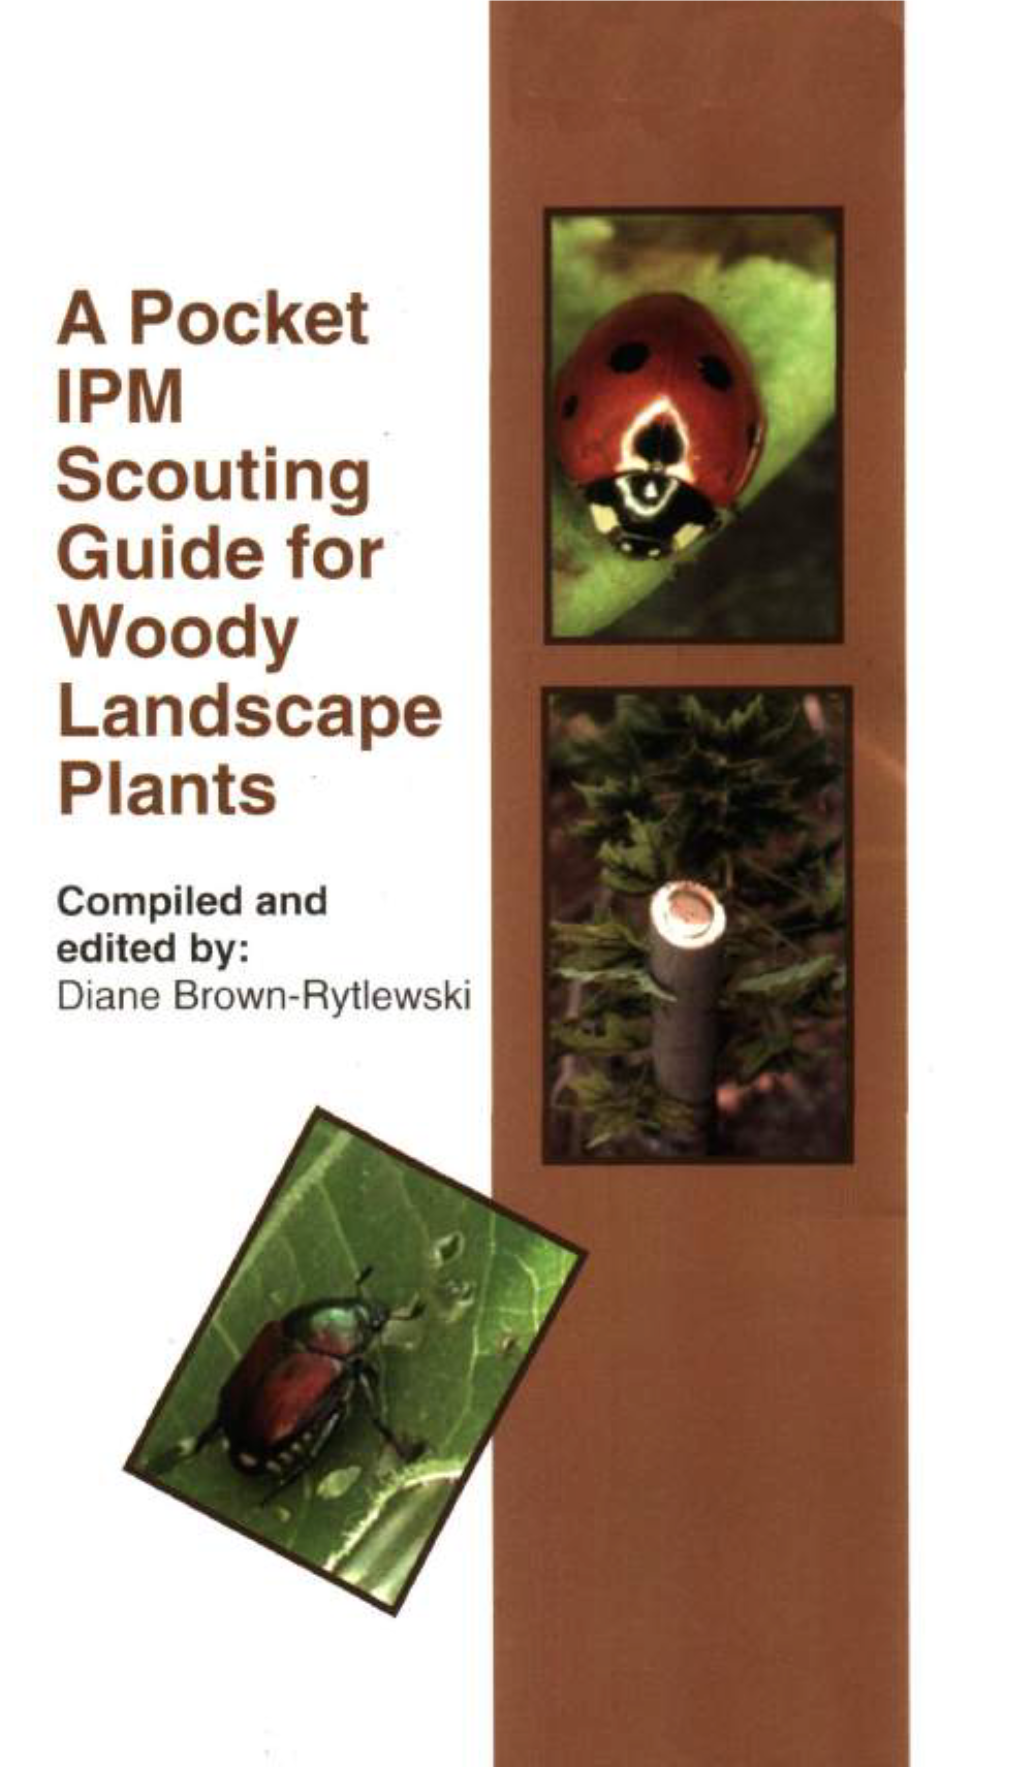 A Pocket IPM Scouting Guide for Woody Landscape Plants Compiled and Edited By: Diane Brown-Rytlewski a Pocket IPM Scouting Guide for Woody Landscape Plants